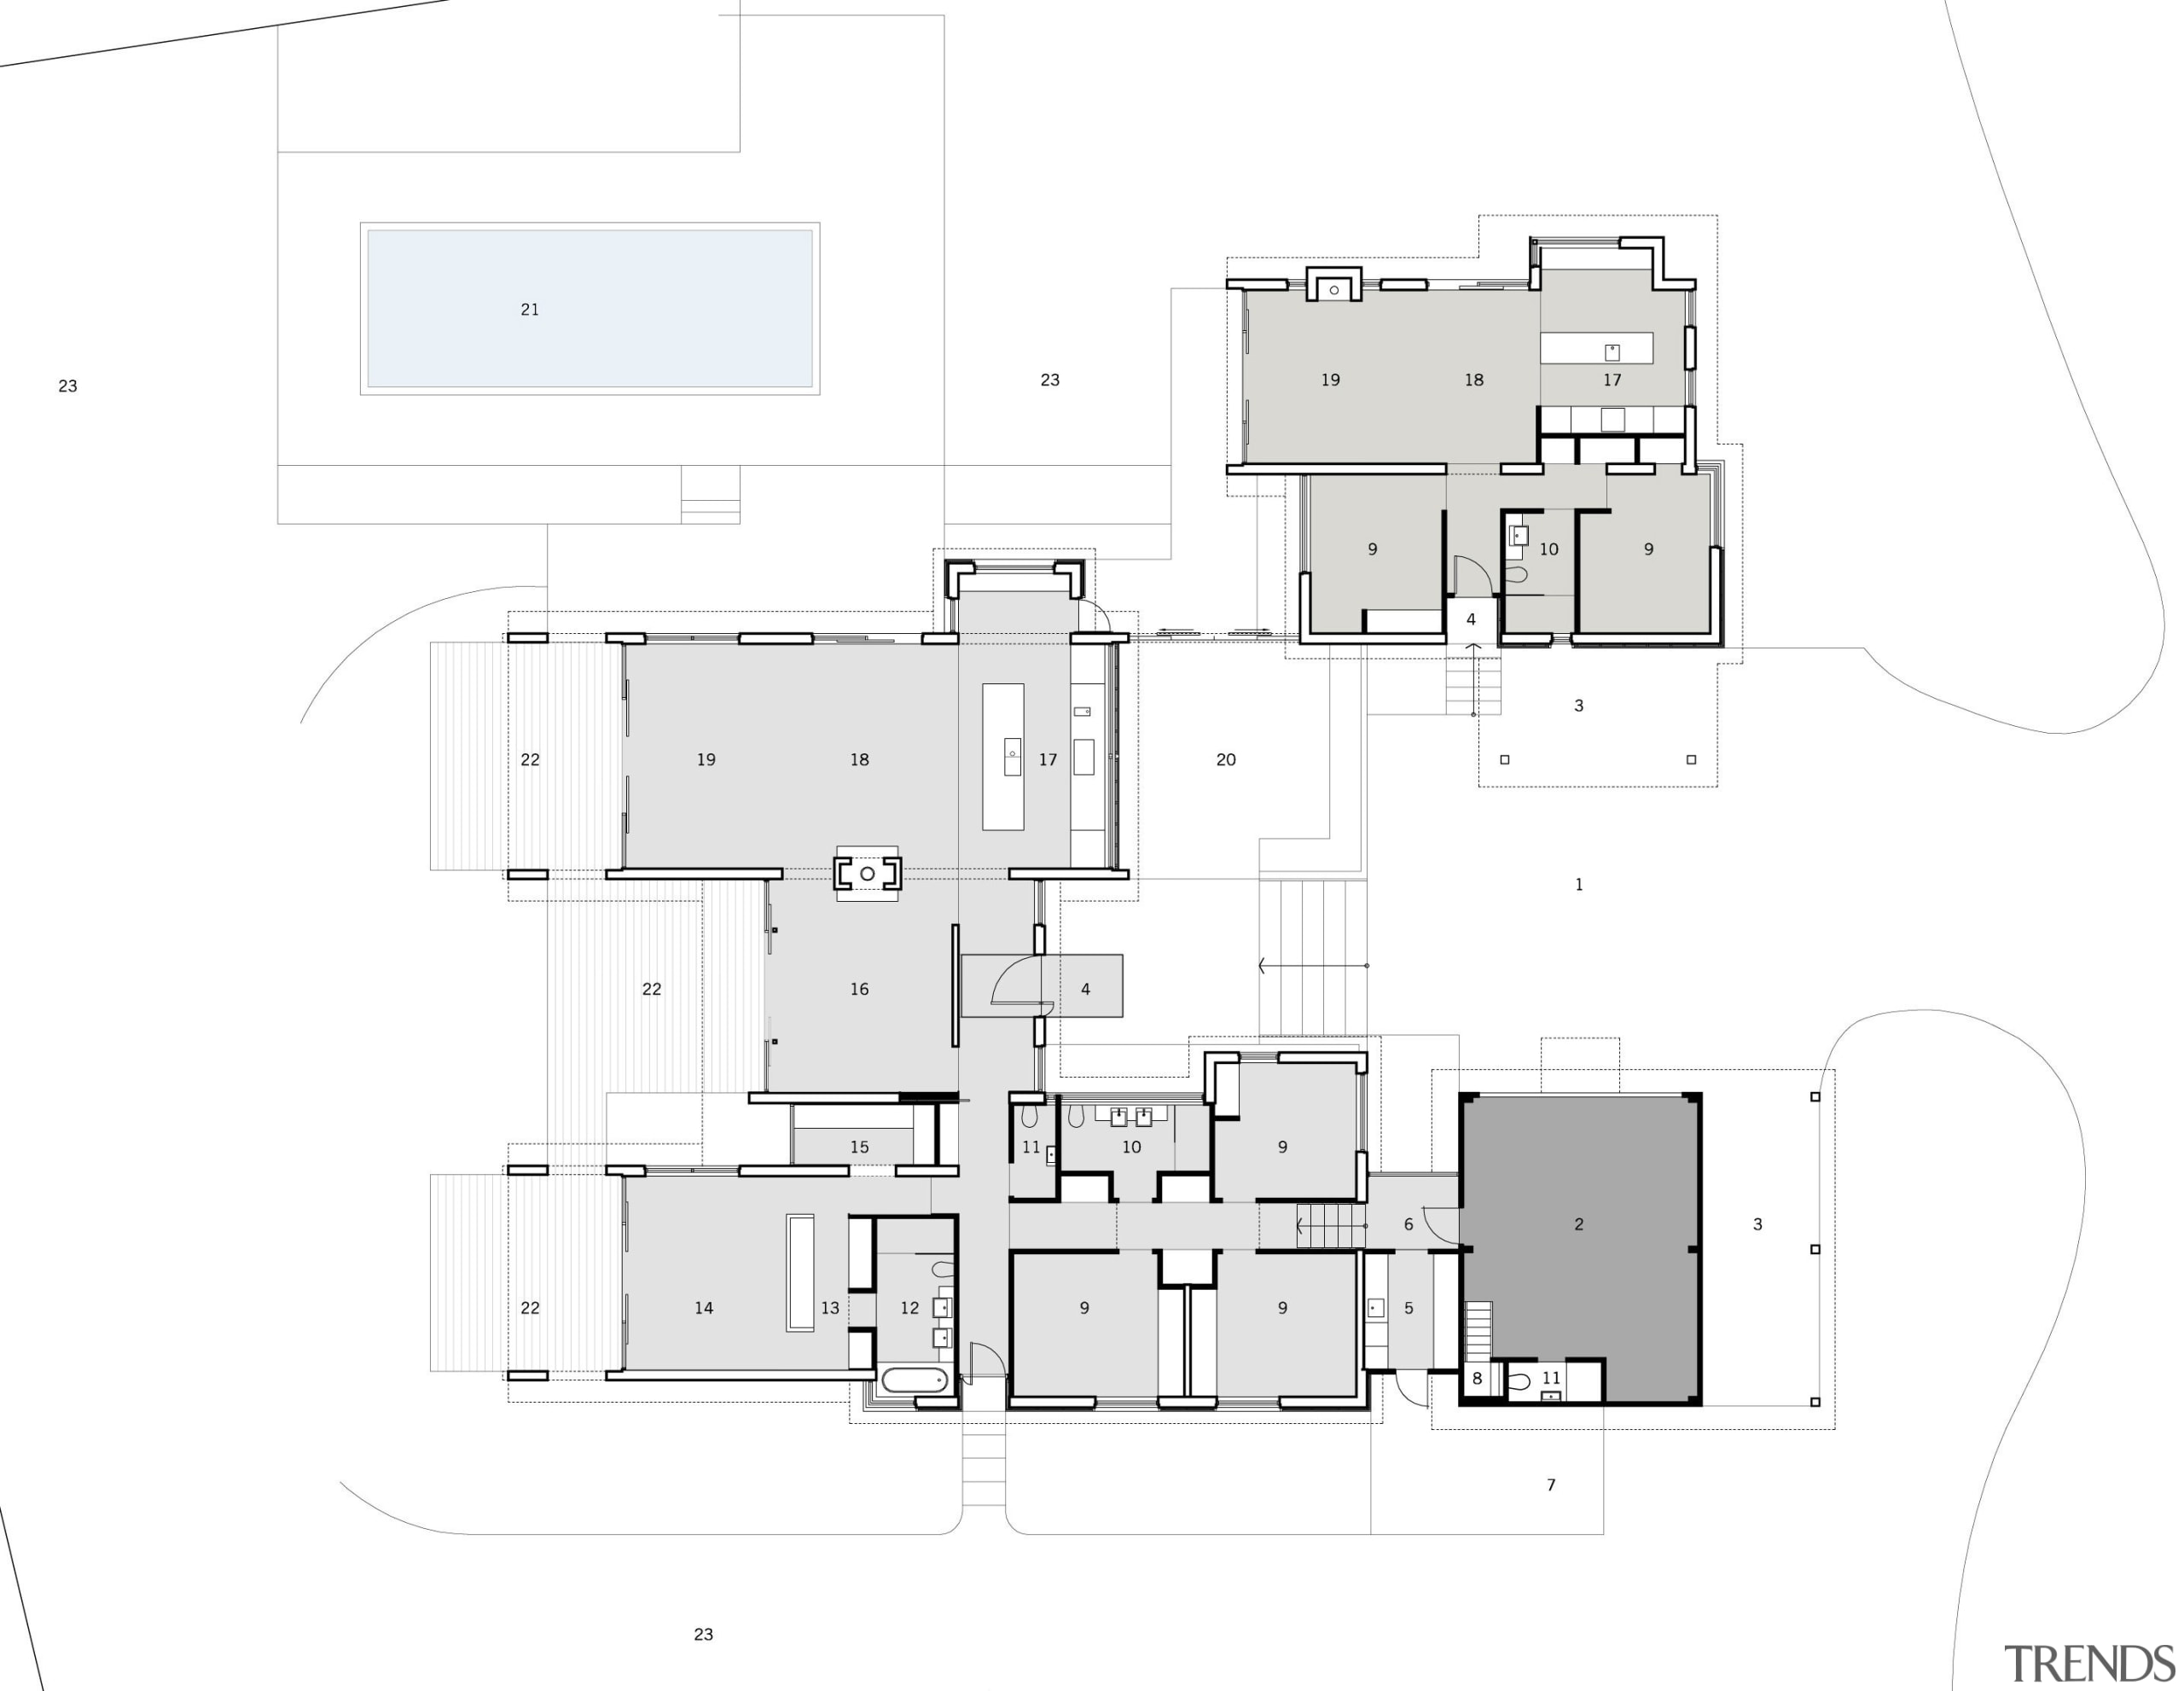 Floor plan of house. - Floor plan of architecture, area, design, diagram, elevation, floor plan, font, line, plan, product design, residential area, schematic, white